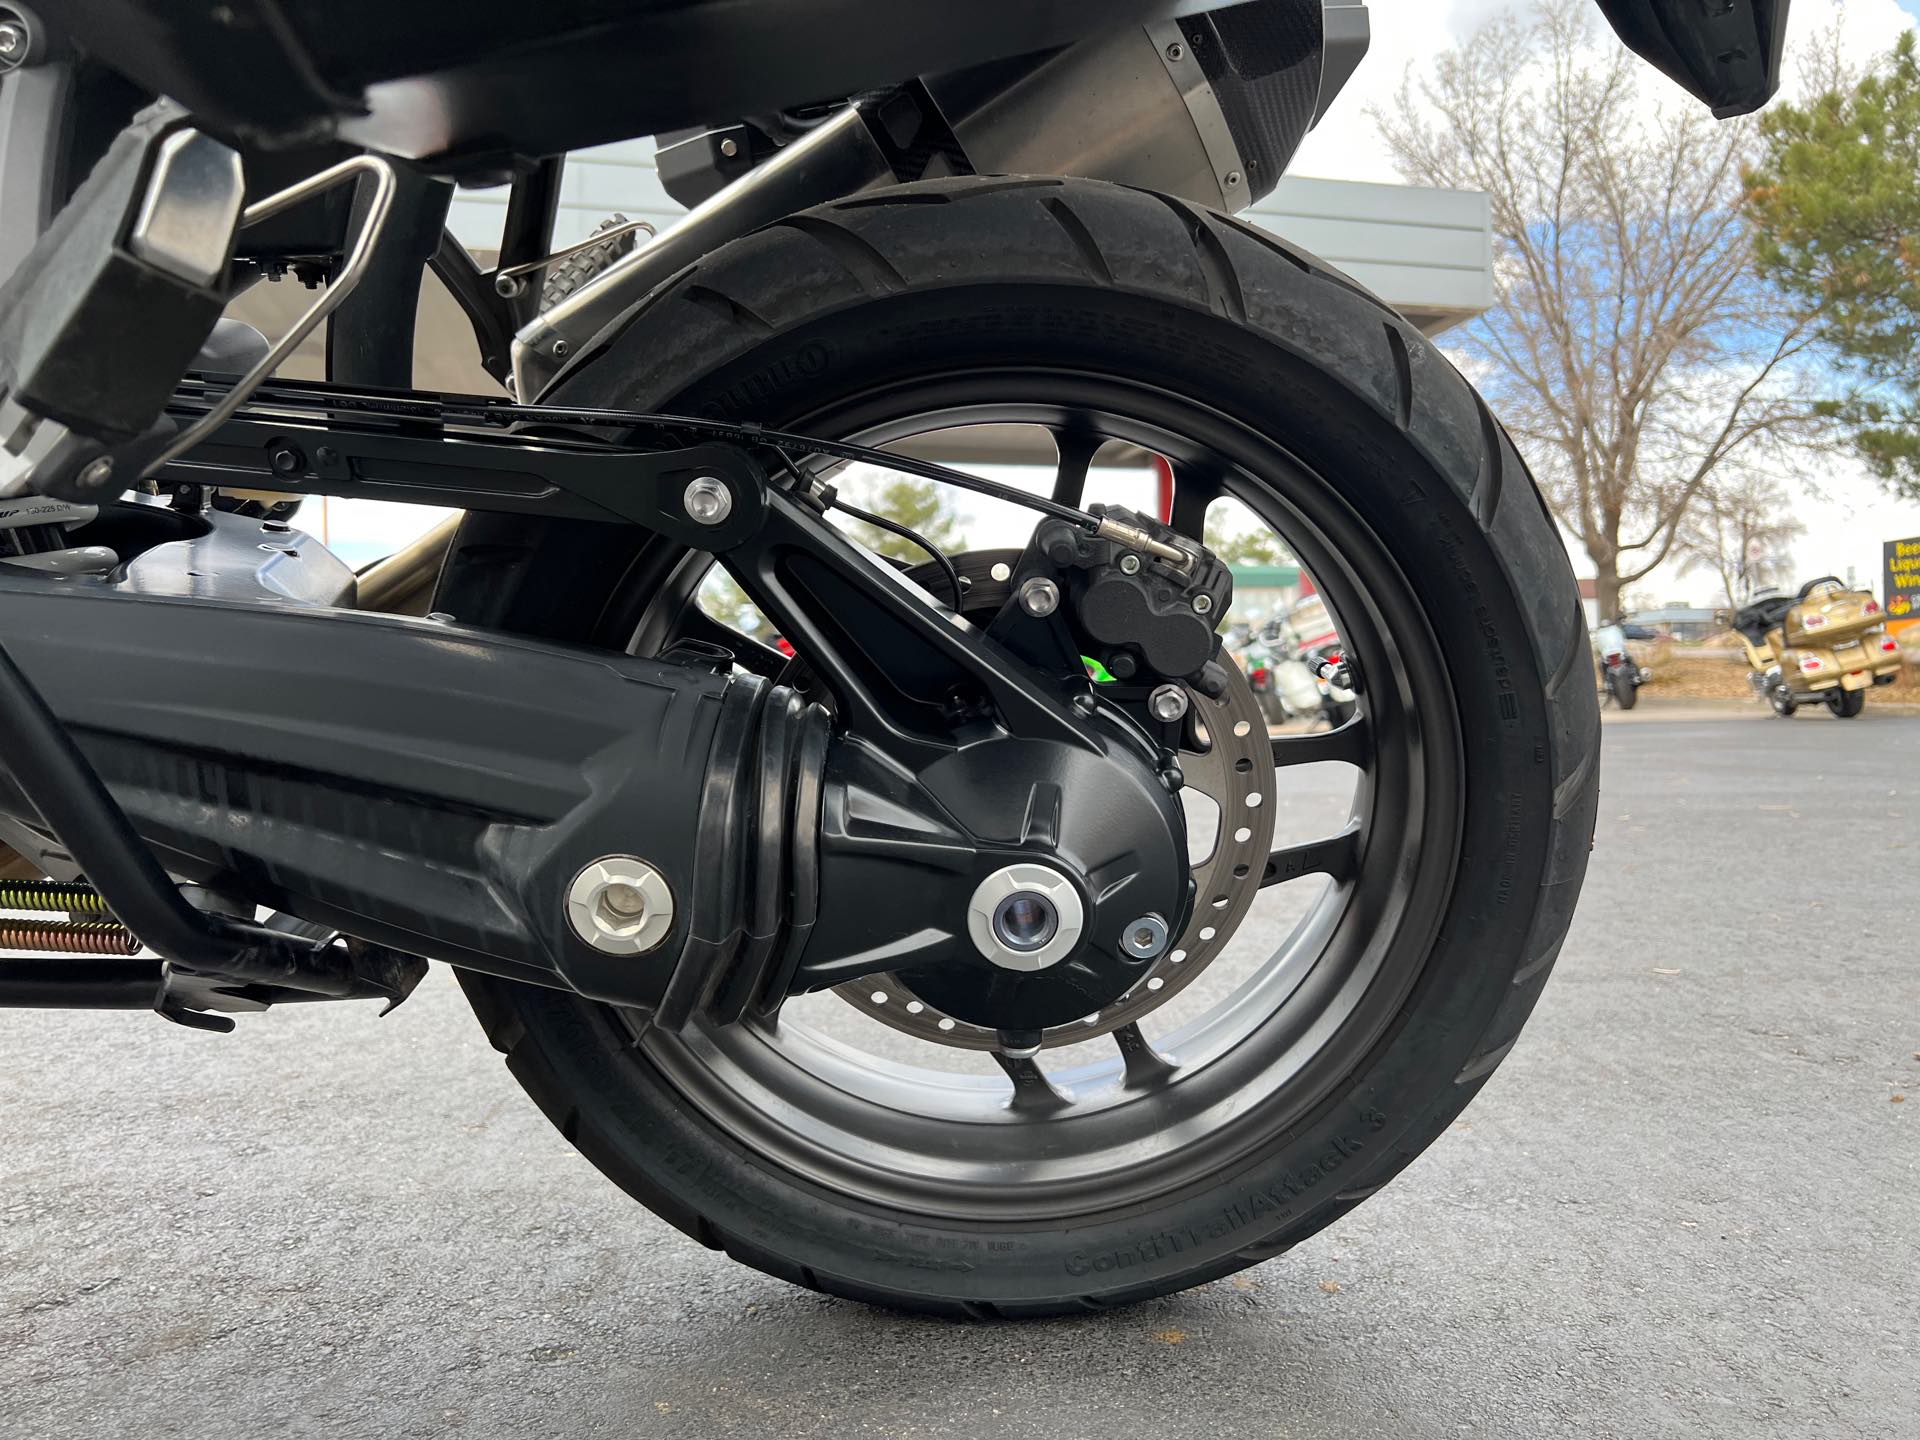 2018 Triumph Tiger 1200 XRT at Aces Motorcycles - Fort Collins